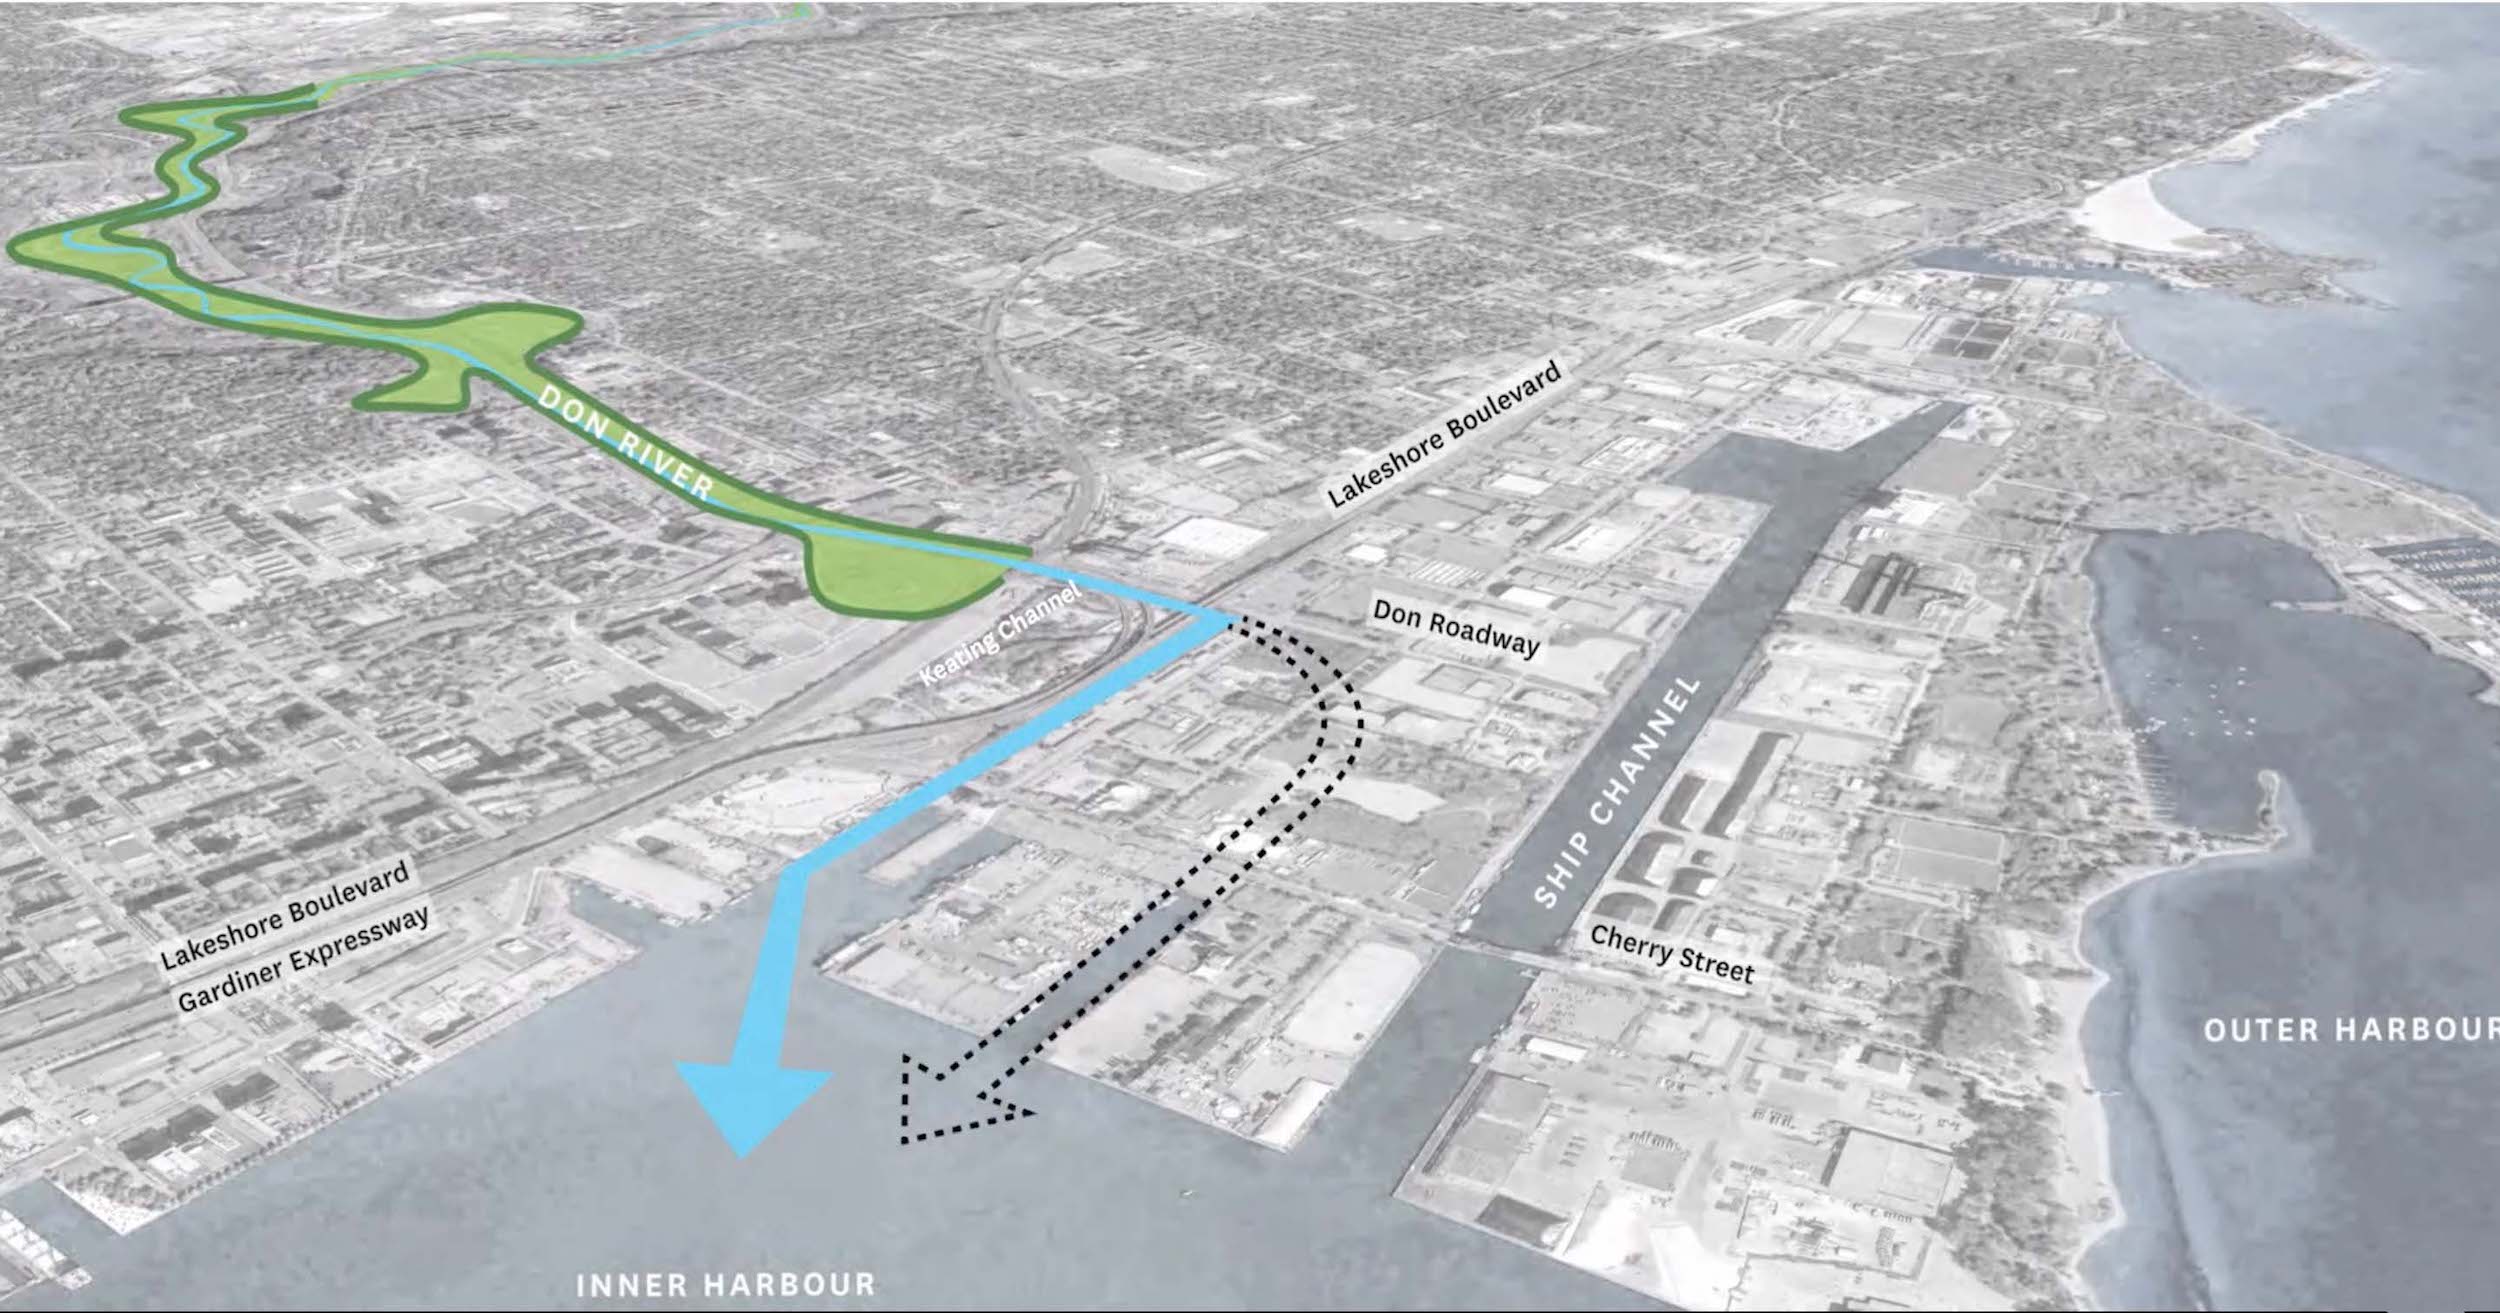 An illustration of the new path the Don River will take to Lake Ontario when the Villiers Island project is completed.